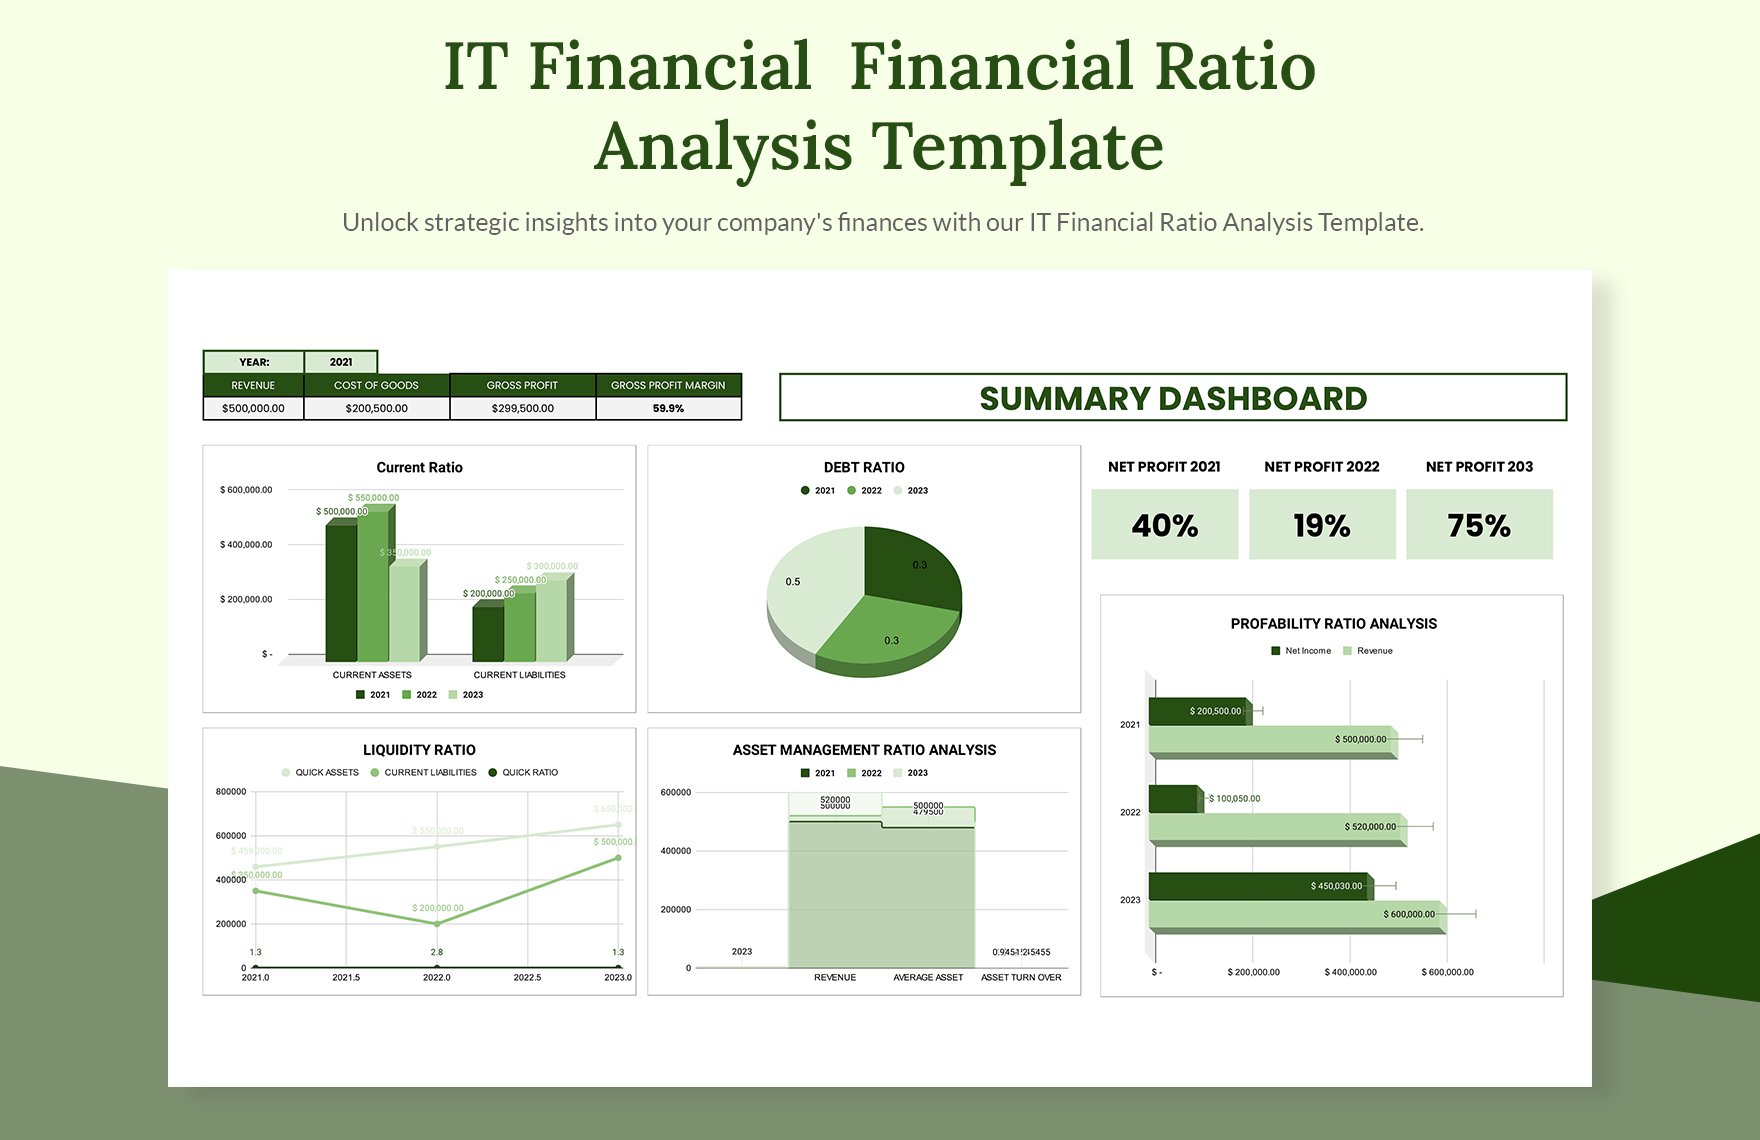 IT Financial Financial Ratio Analysis Template